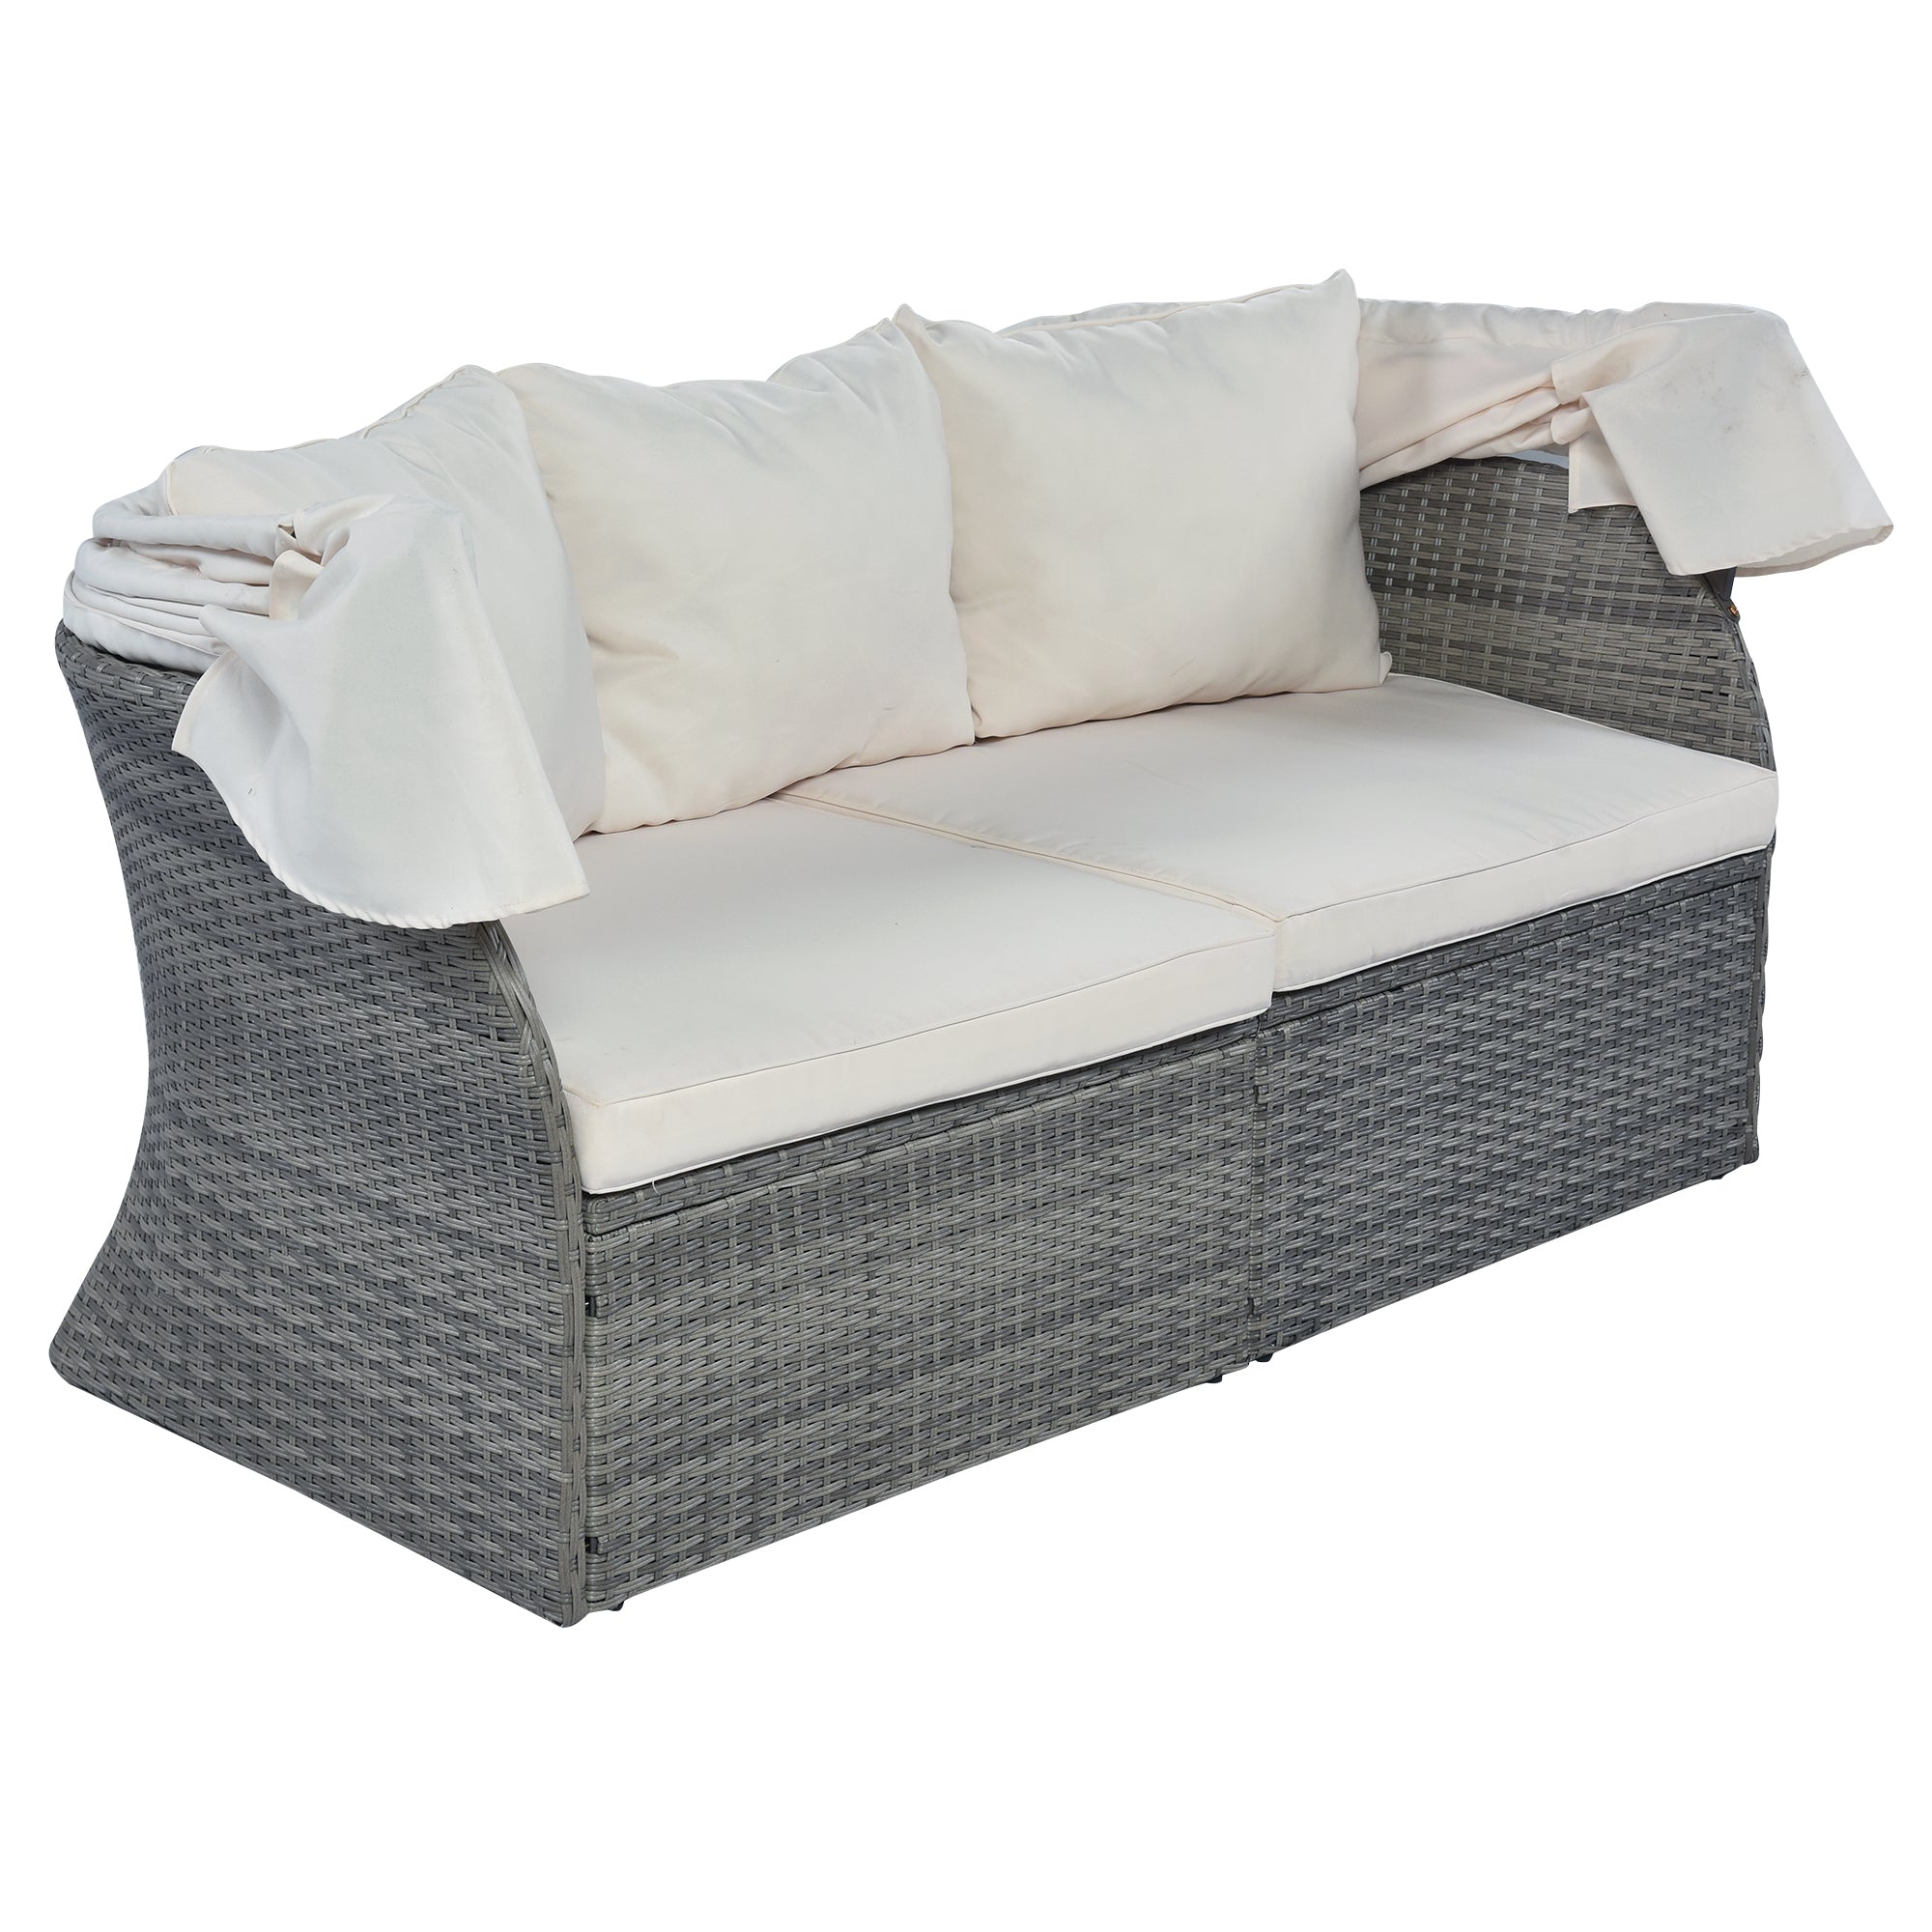 U STYLE Outdoor Patio Furniture Set Daybed Sunbed with beige-rattan